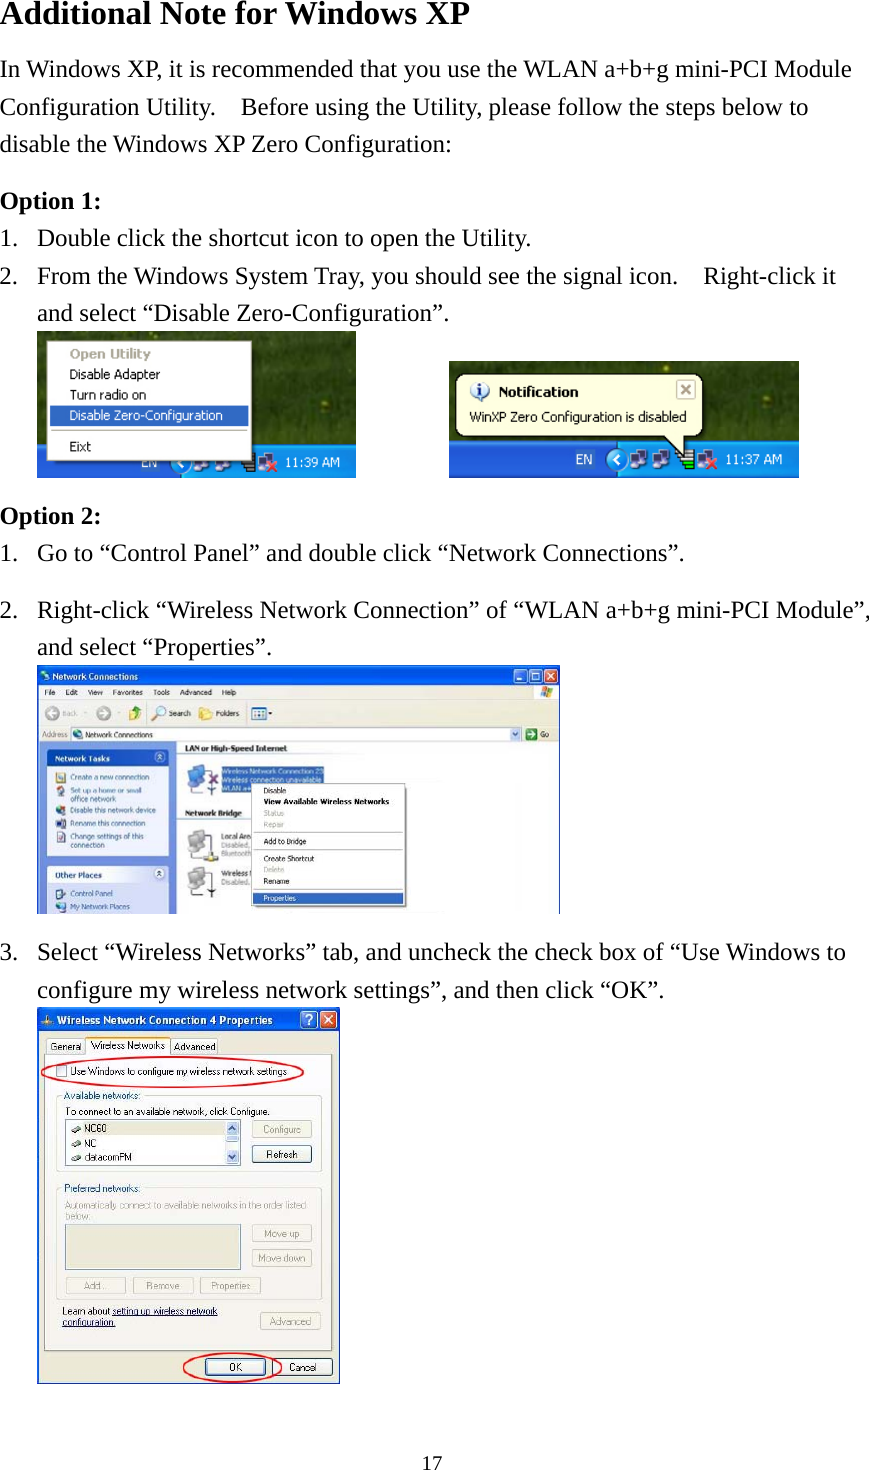  17Additional Note for Windows XP   In Windows XP, it is recommended that you use the WLAN a+b+g mini-PCI Module Configuration Utility.    Before using the Utility, please follow the steps below to disable the Windows XP Zero Configuration:  Option 1: 1. Double click the shortcut icon to open the Utility. 2. From the Windows System Tray, you should see the signal icon.    Right-click it and select “Disable Zero-Configuration”.     Option 2: 1. Go to “Control Panel” and double click “Network Connections”.  2. Right-click “Wireless Network Connection” of “WLAN a+b+g mini-PCI Module”, and select “Properties”.   3. Select “Wireless Networks” tab, and uncheck the check box of “Use Windows to configure my wireless network settings”, and then click “OK”.  